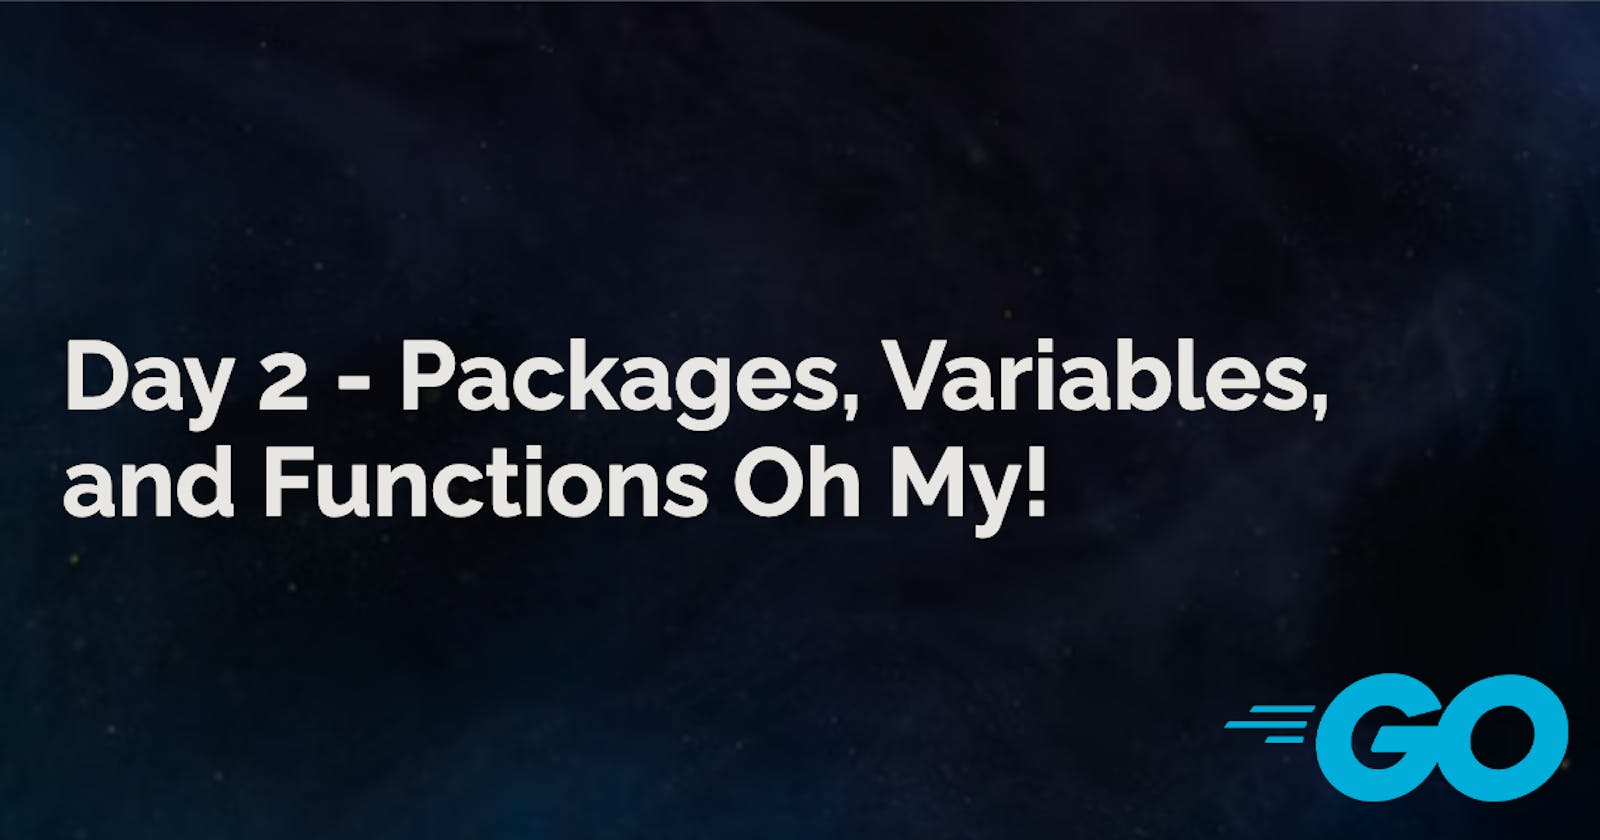 Day 2 - Packages, Variables, and Functions Oh My!